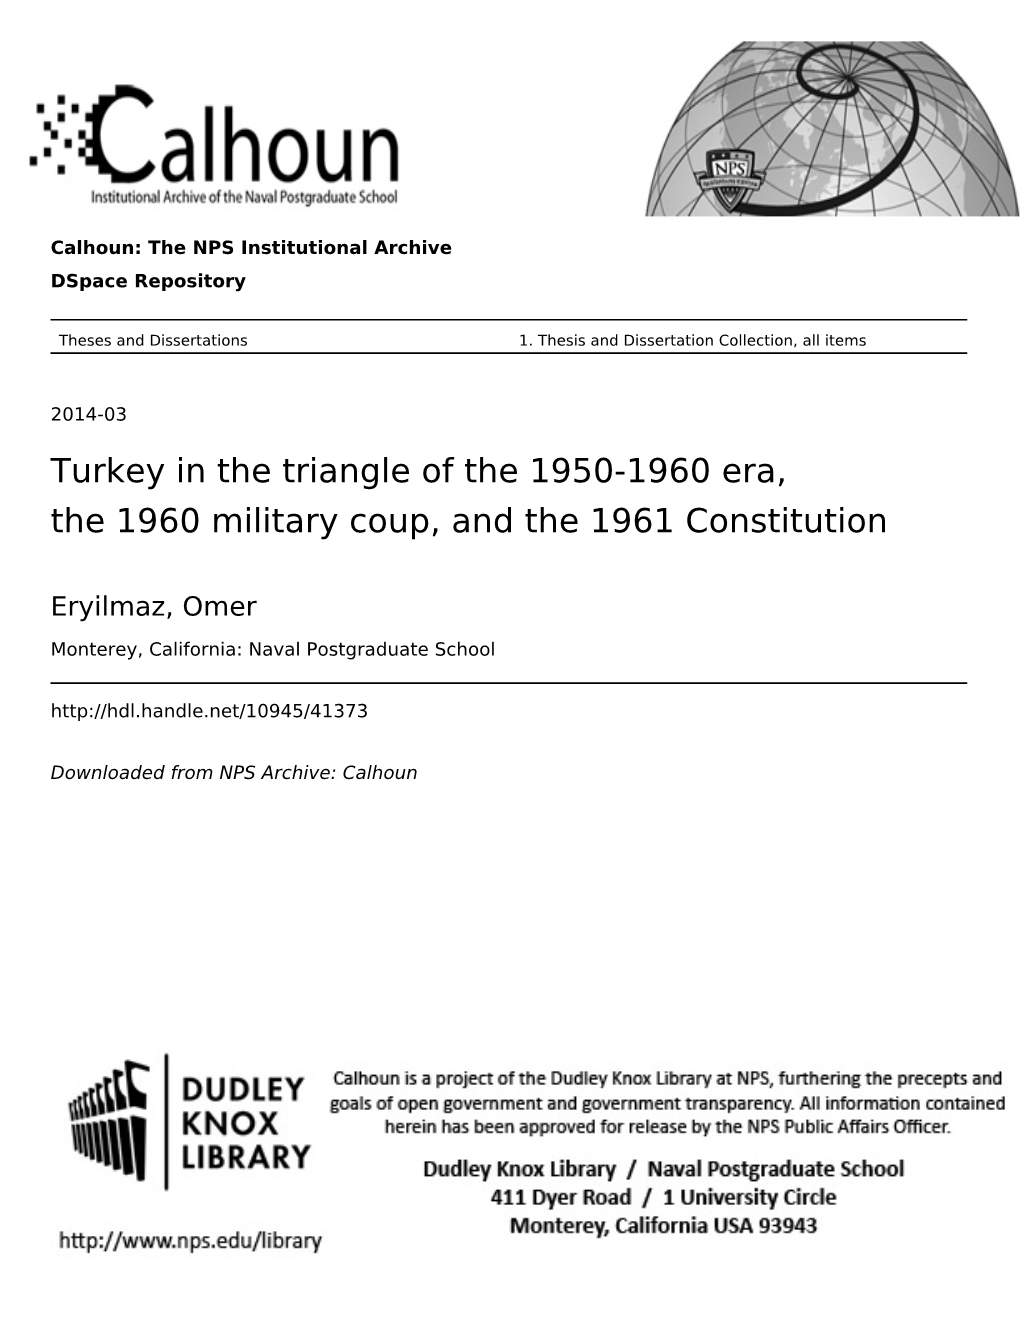 Turkey in the Triangle of the 1950-1960 Era, the 1960 Military Coup, and the 1961 Constitution